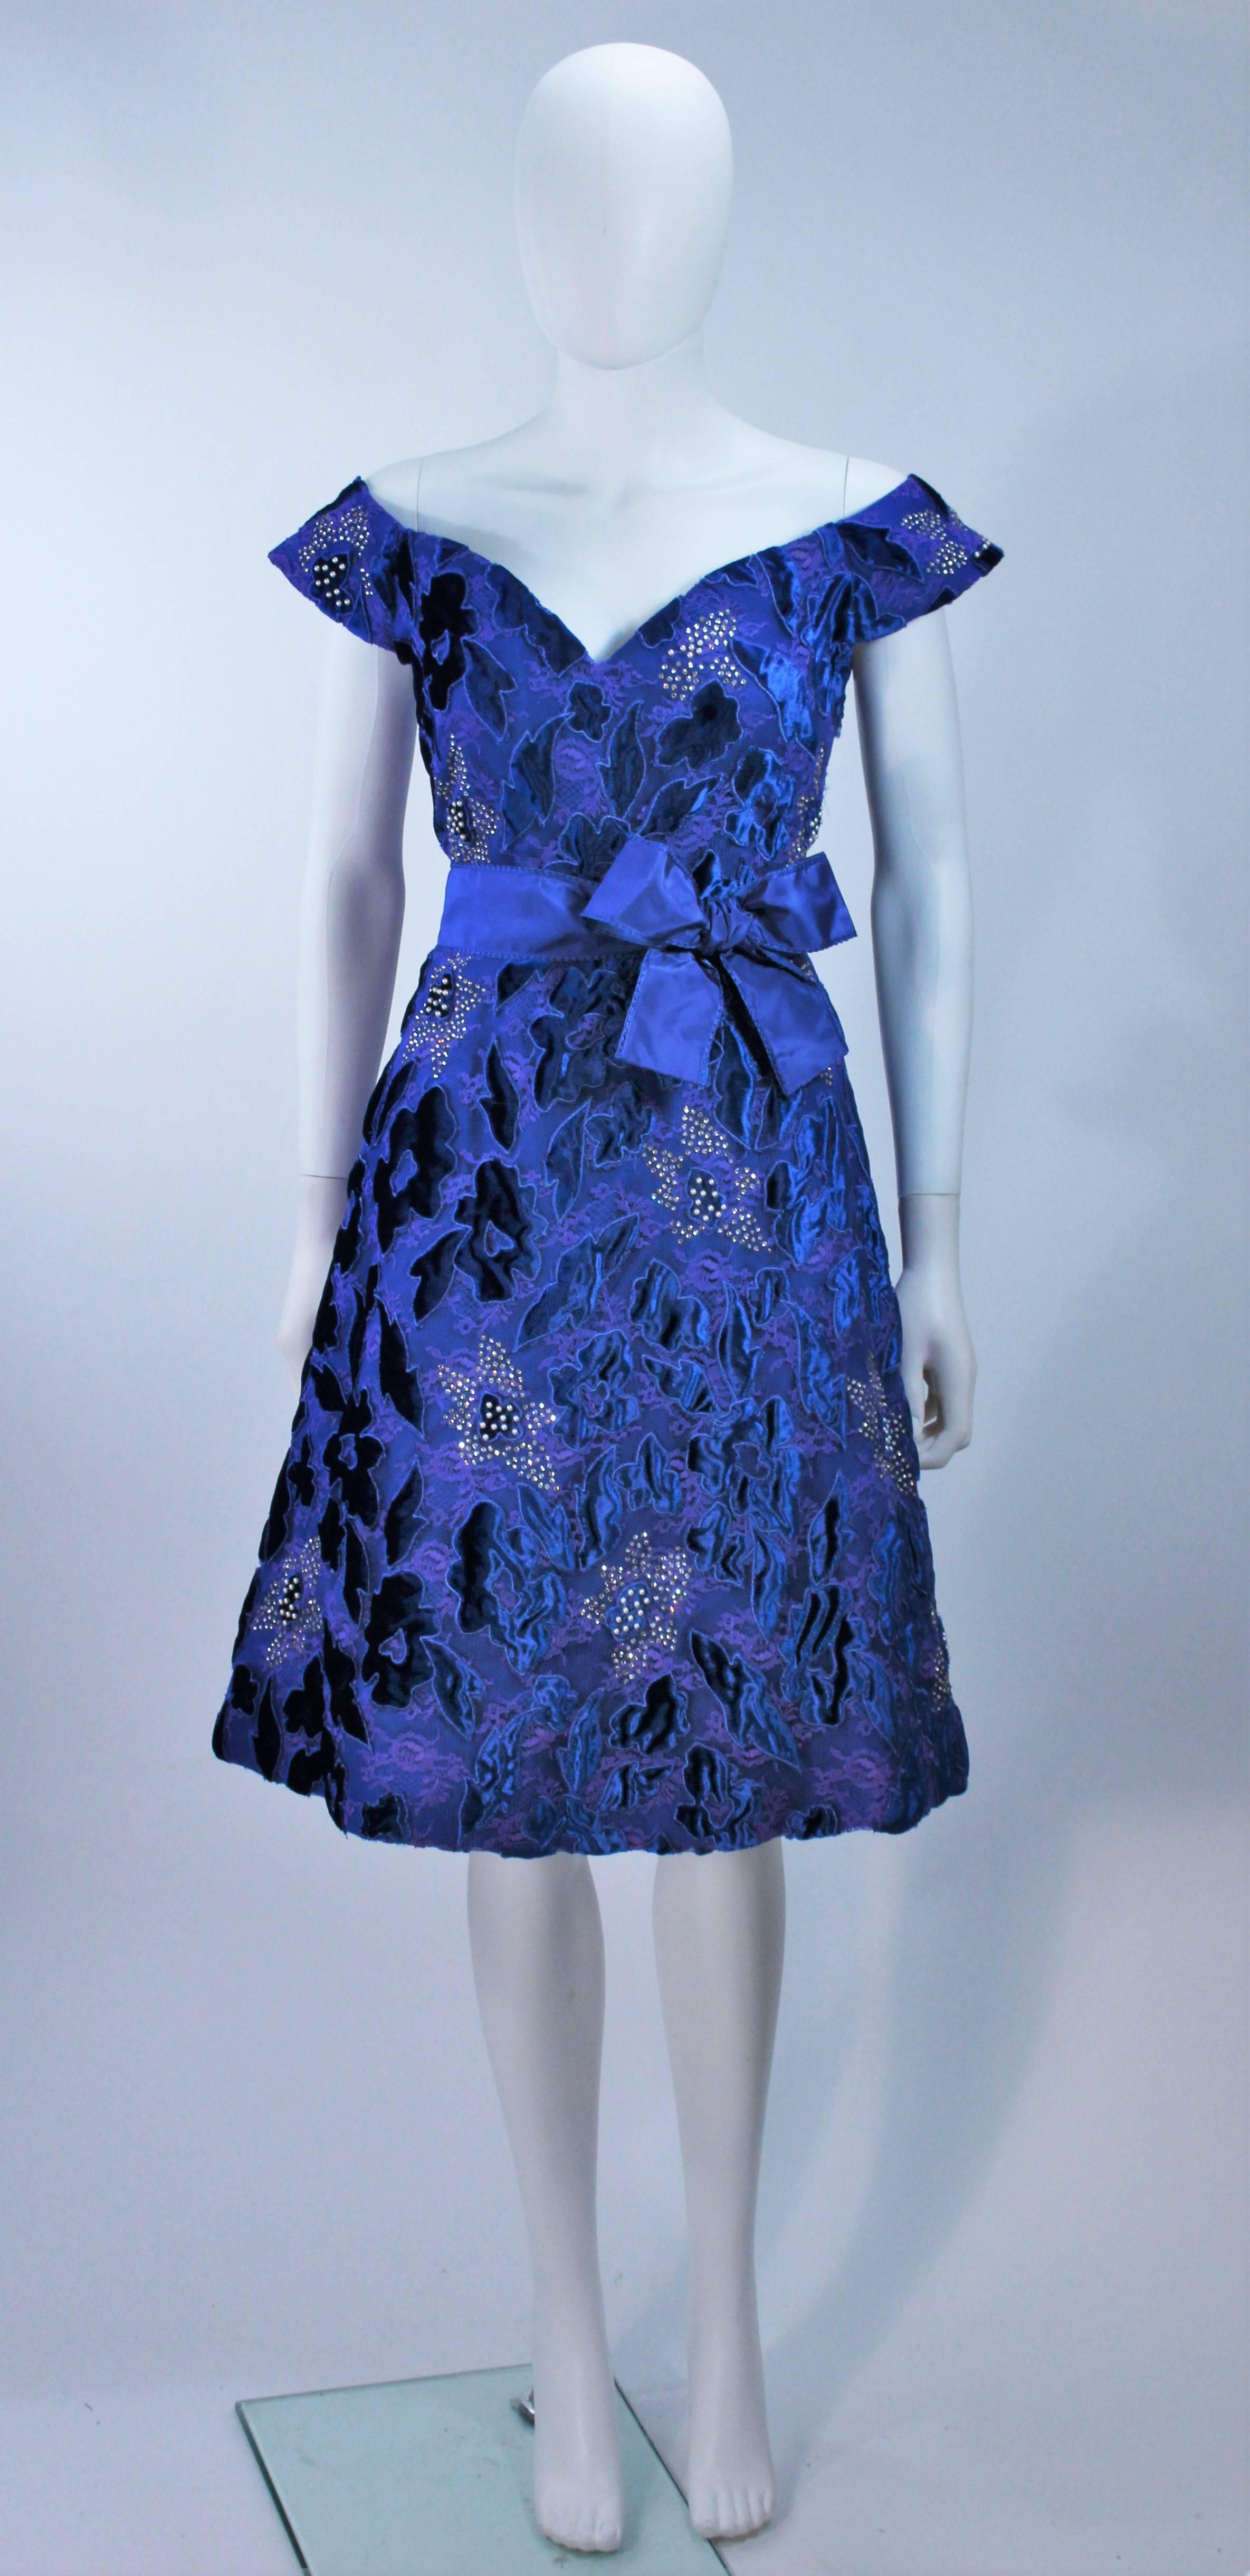  This Arnold Scaasi cocktail dress is composed of a blue velvet and satin combination, with a floral pattern and rhinestone applique. There is a center back zipper closure. (photographed with crinoline, not included). In excellent vintage condition.